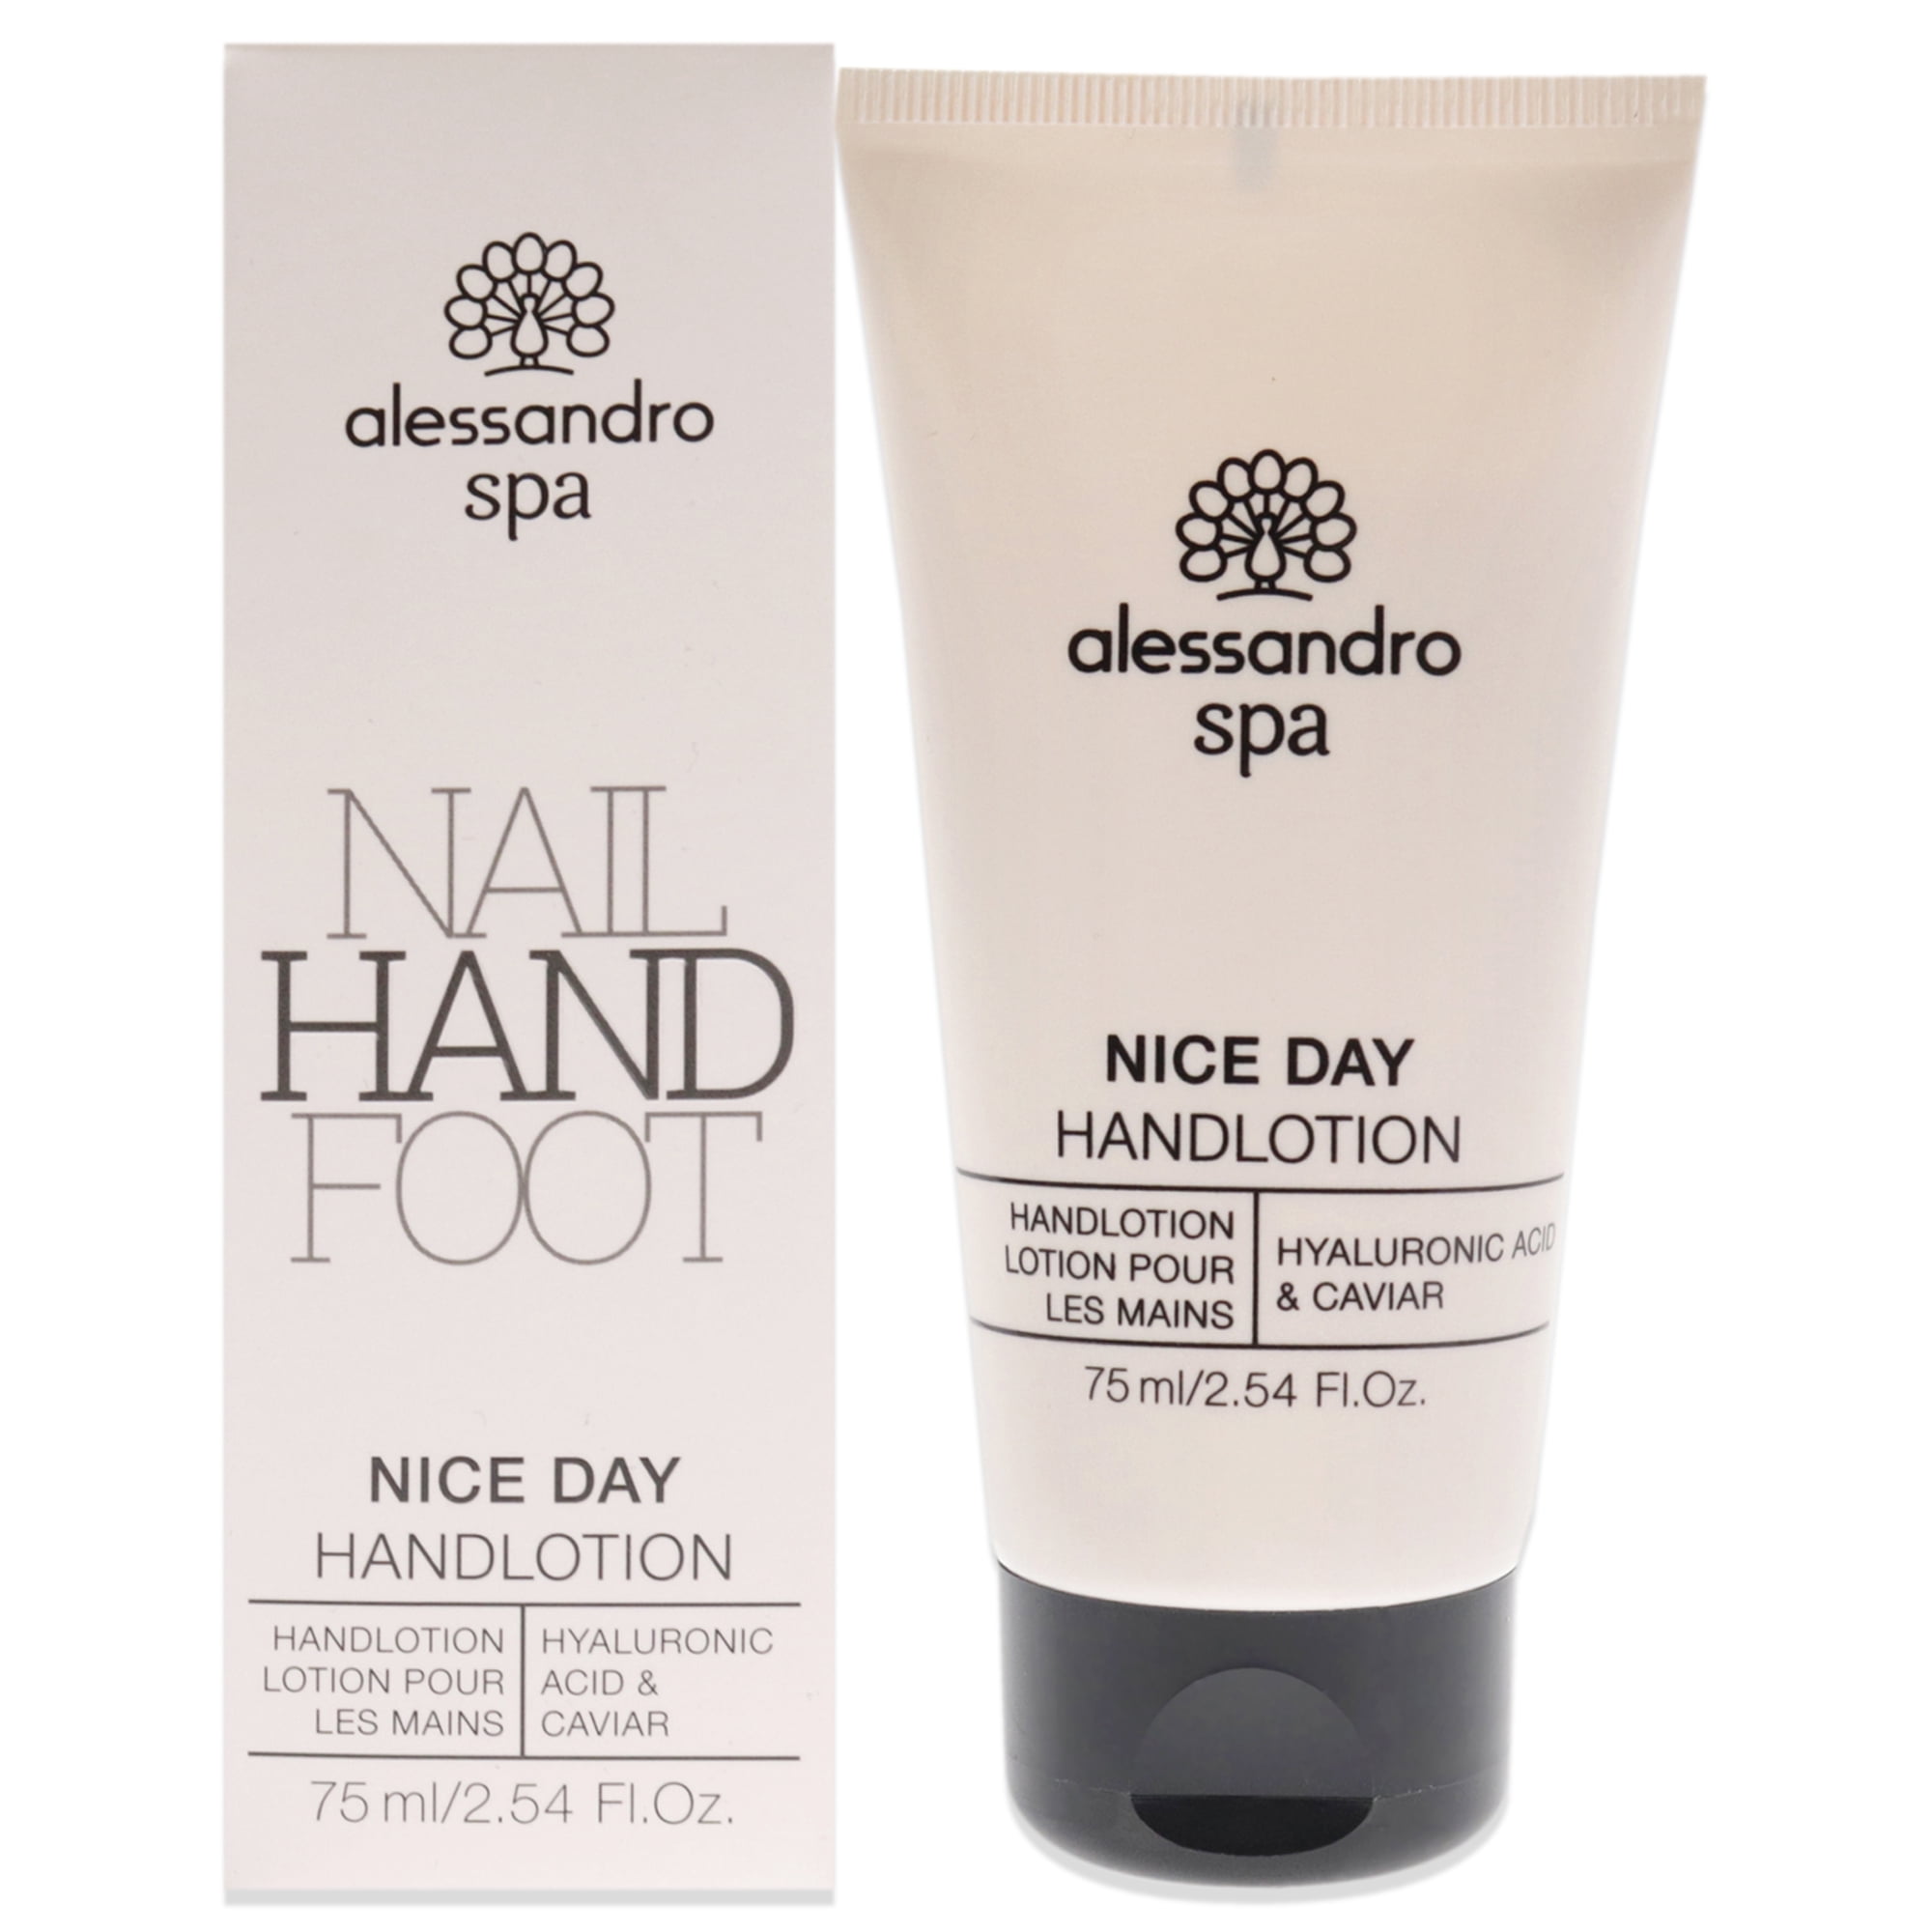 Alessandro Spa Nice Day 2.54 oz Lotion Lotion, Hand